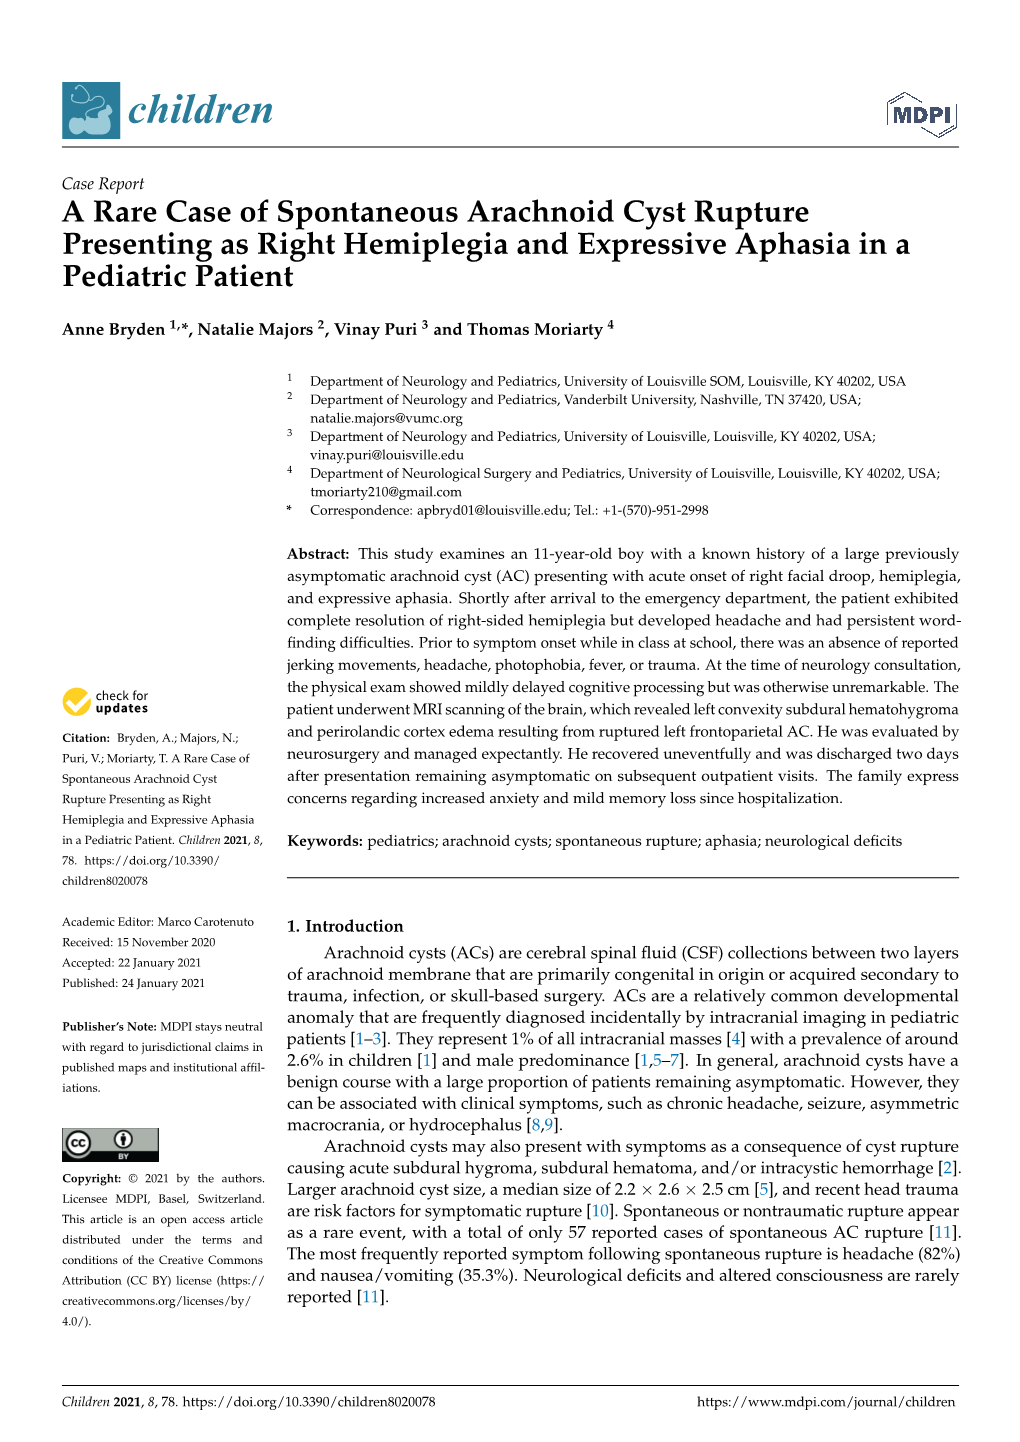 A Rare Case of Spontaneous Arachnoid Cyst Rupture Presenting As Right Hemiplegia and Expressive Aphasia in a Pediatric Patient